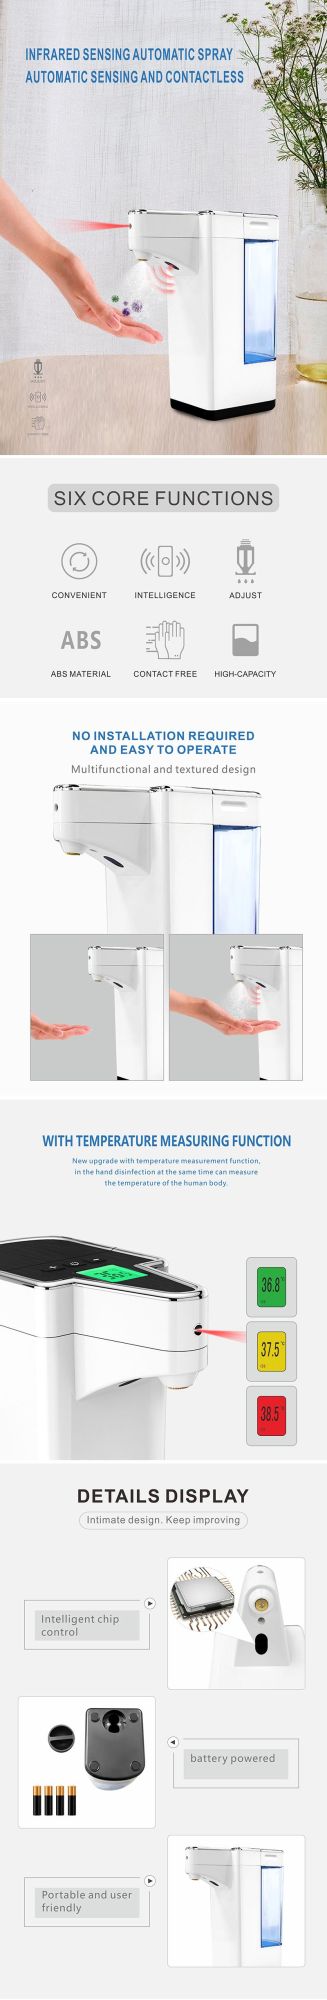 Low MOQ, Large Capacity, Non-Contact Soap Dispenser, Automatic Thermometer, Soap Dispenser, Suitable for Kitchen Classrooms and Offices